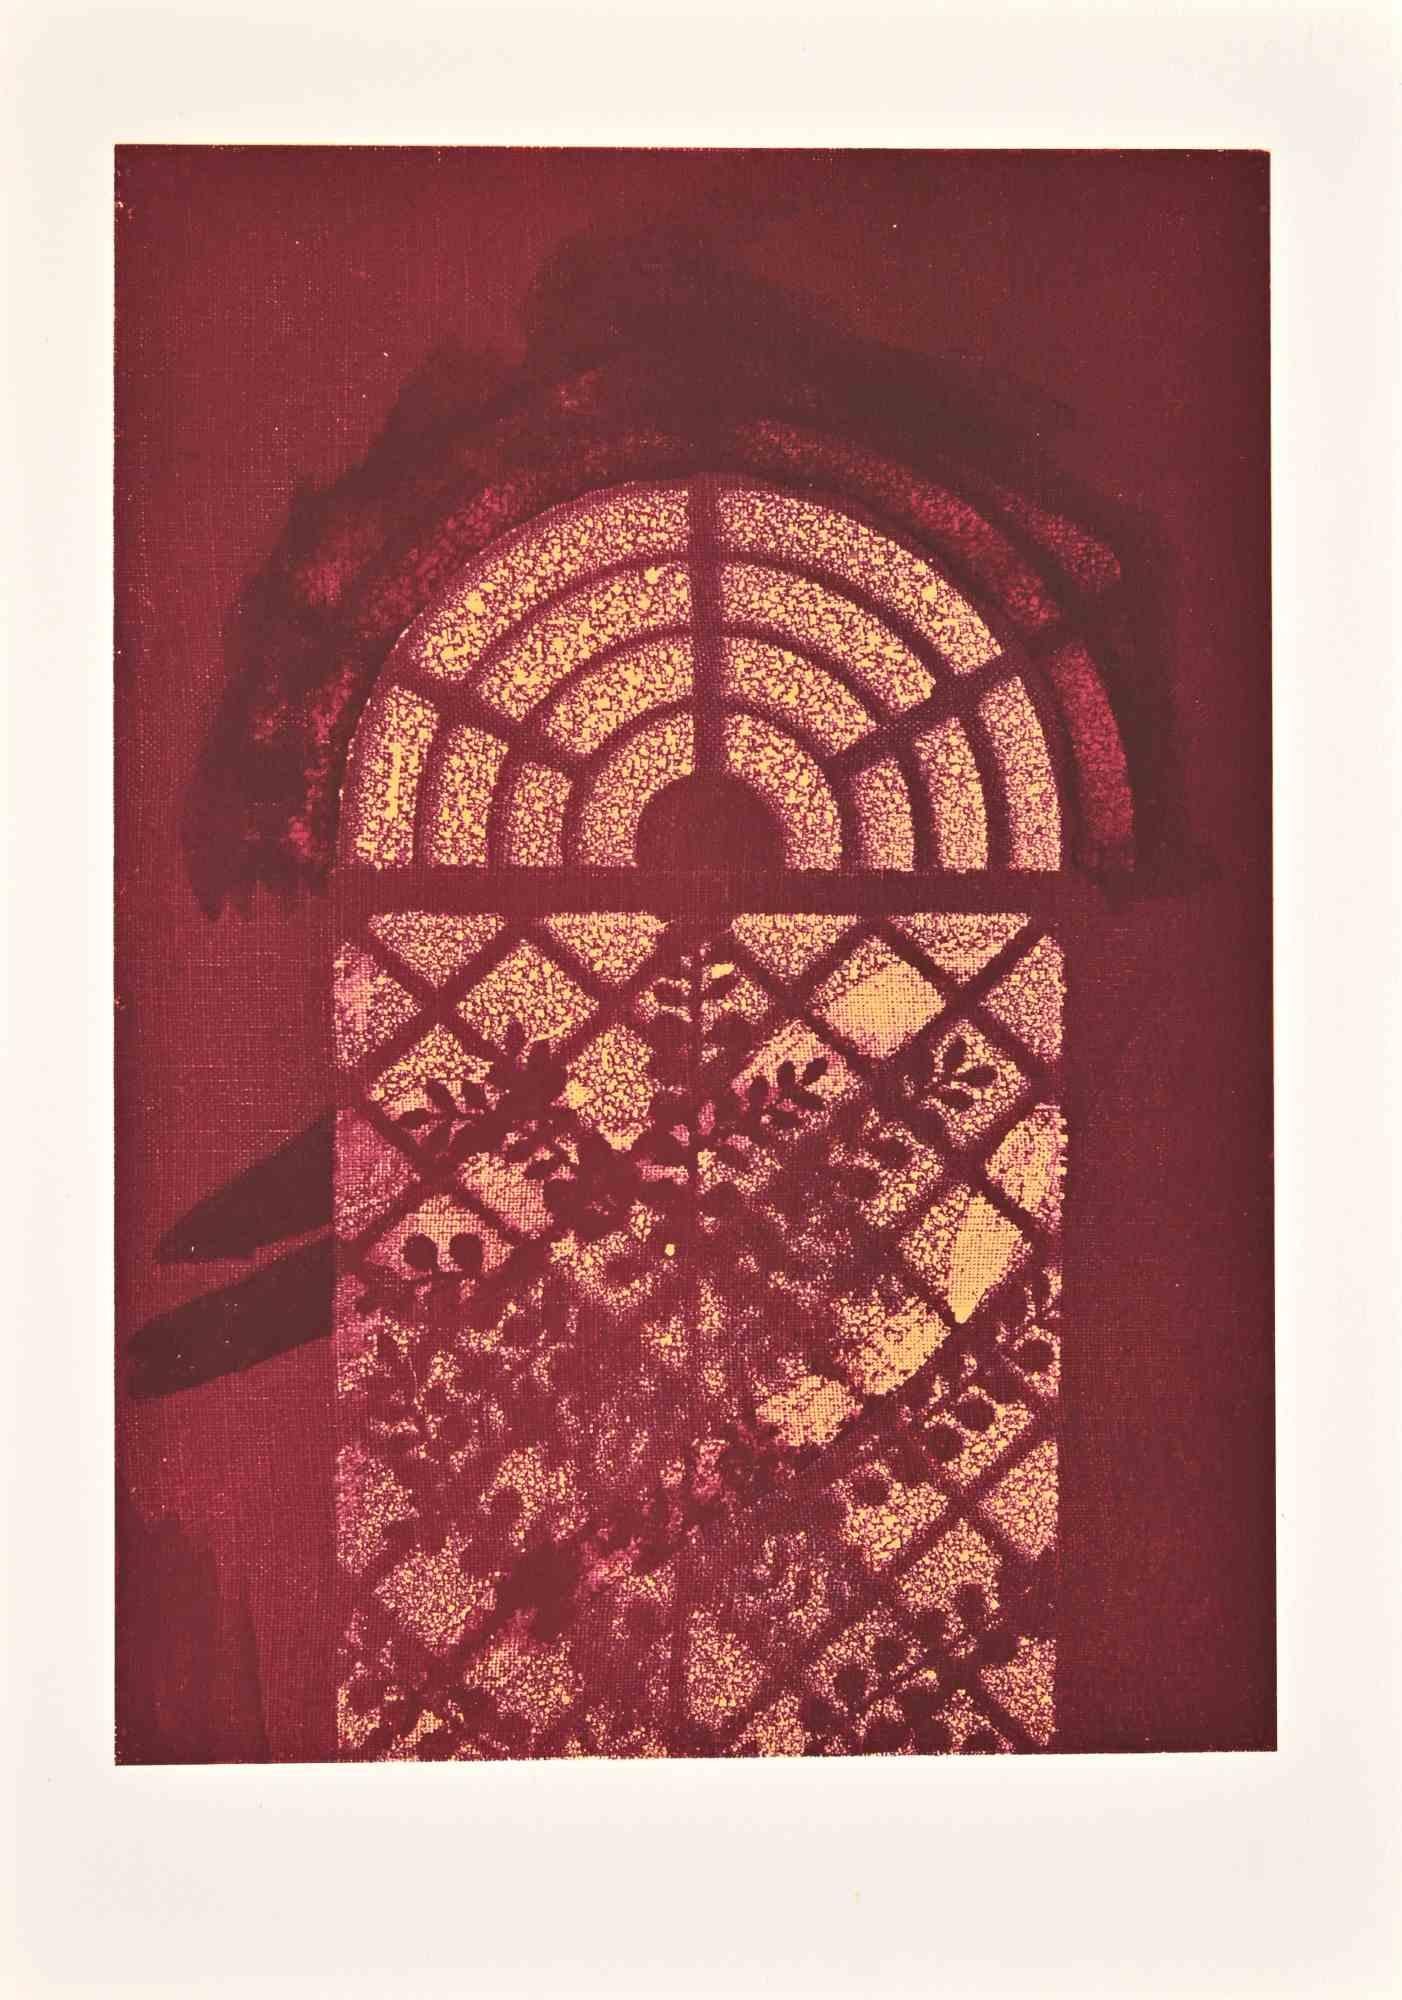 Through the Window is a lithograph on Arches paper realized by Max Ernst in 1972.

Belongs to the suite "Judith". Limited edition of 500.

Unsigned and unnumbered, as issued.

Godd conditions.

The Suite was realized to illustrate the German